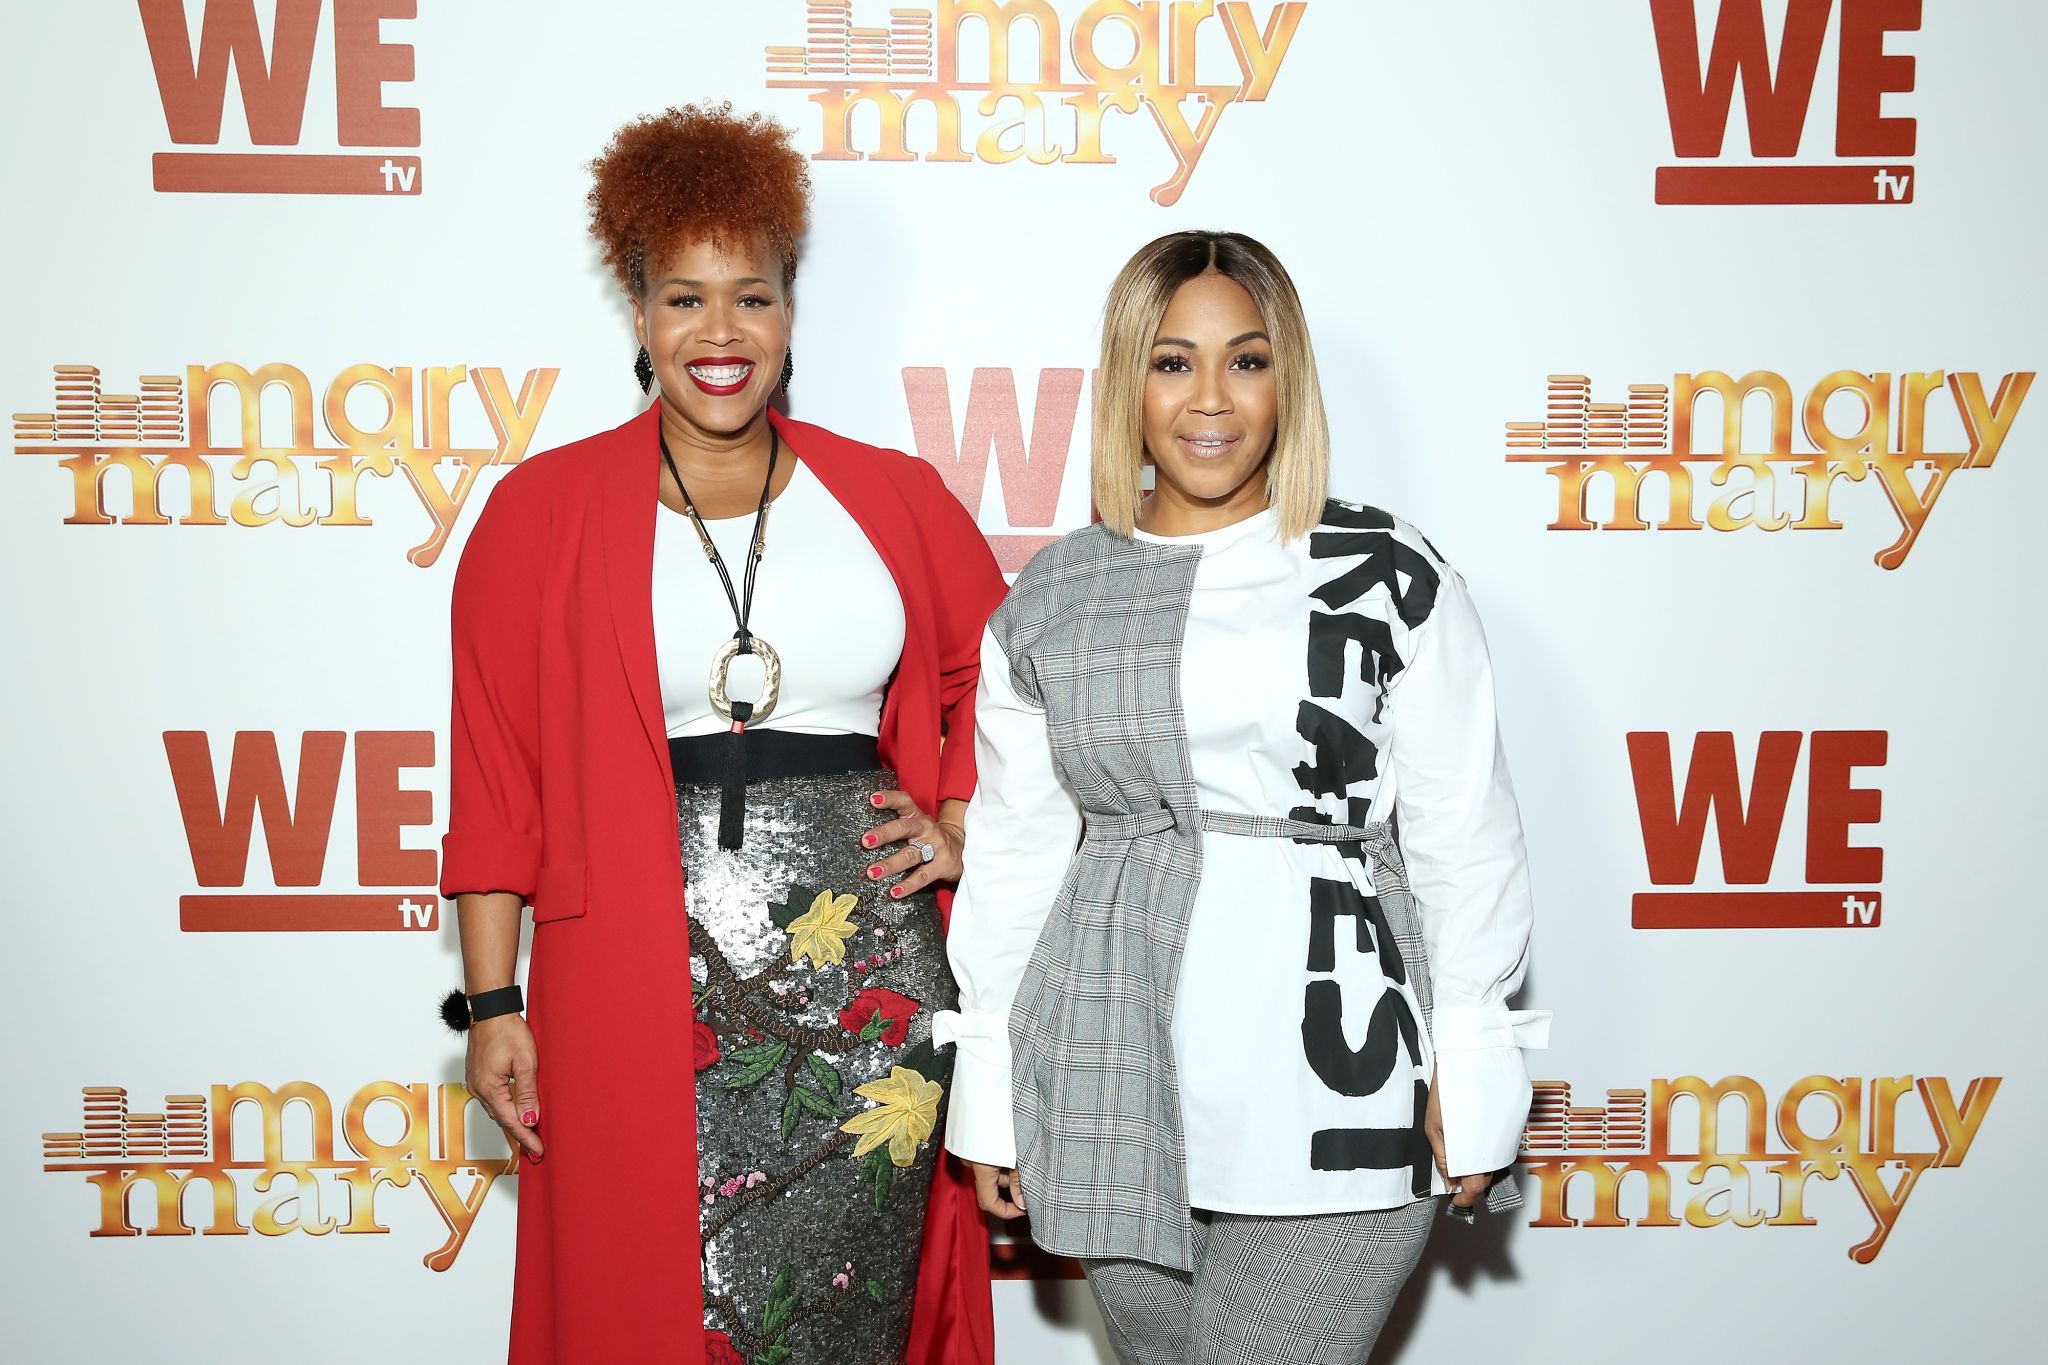 Erica Campbell Makes A Great Announcement About Mary Mary